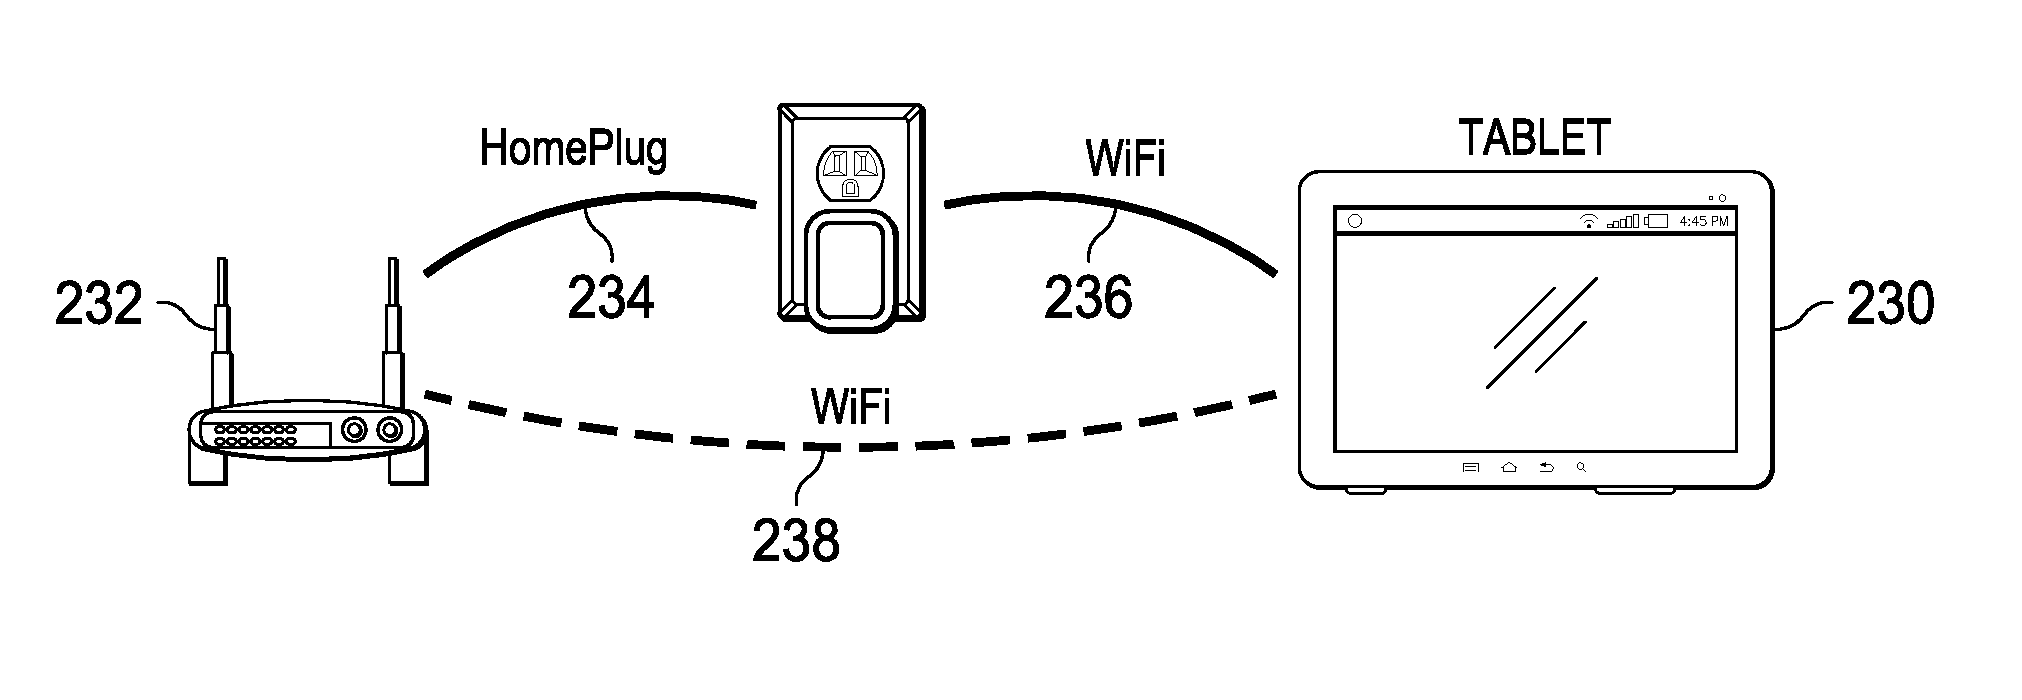 System and Method for an Energy Efficient Network Adaptor with Security Provisions